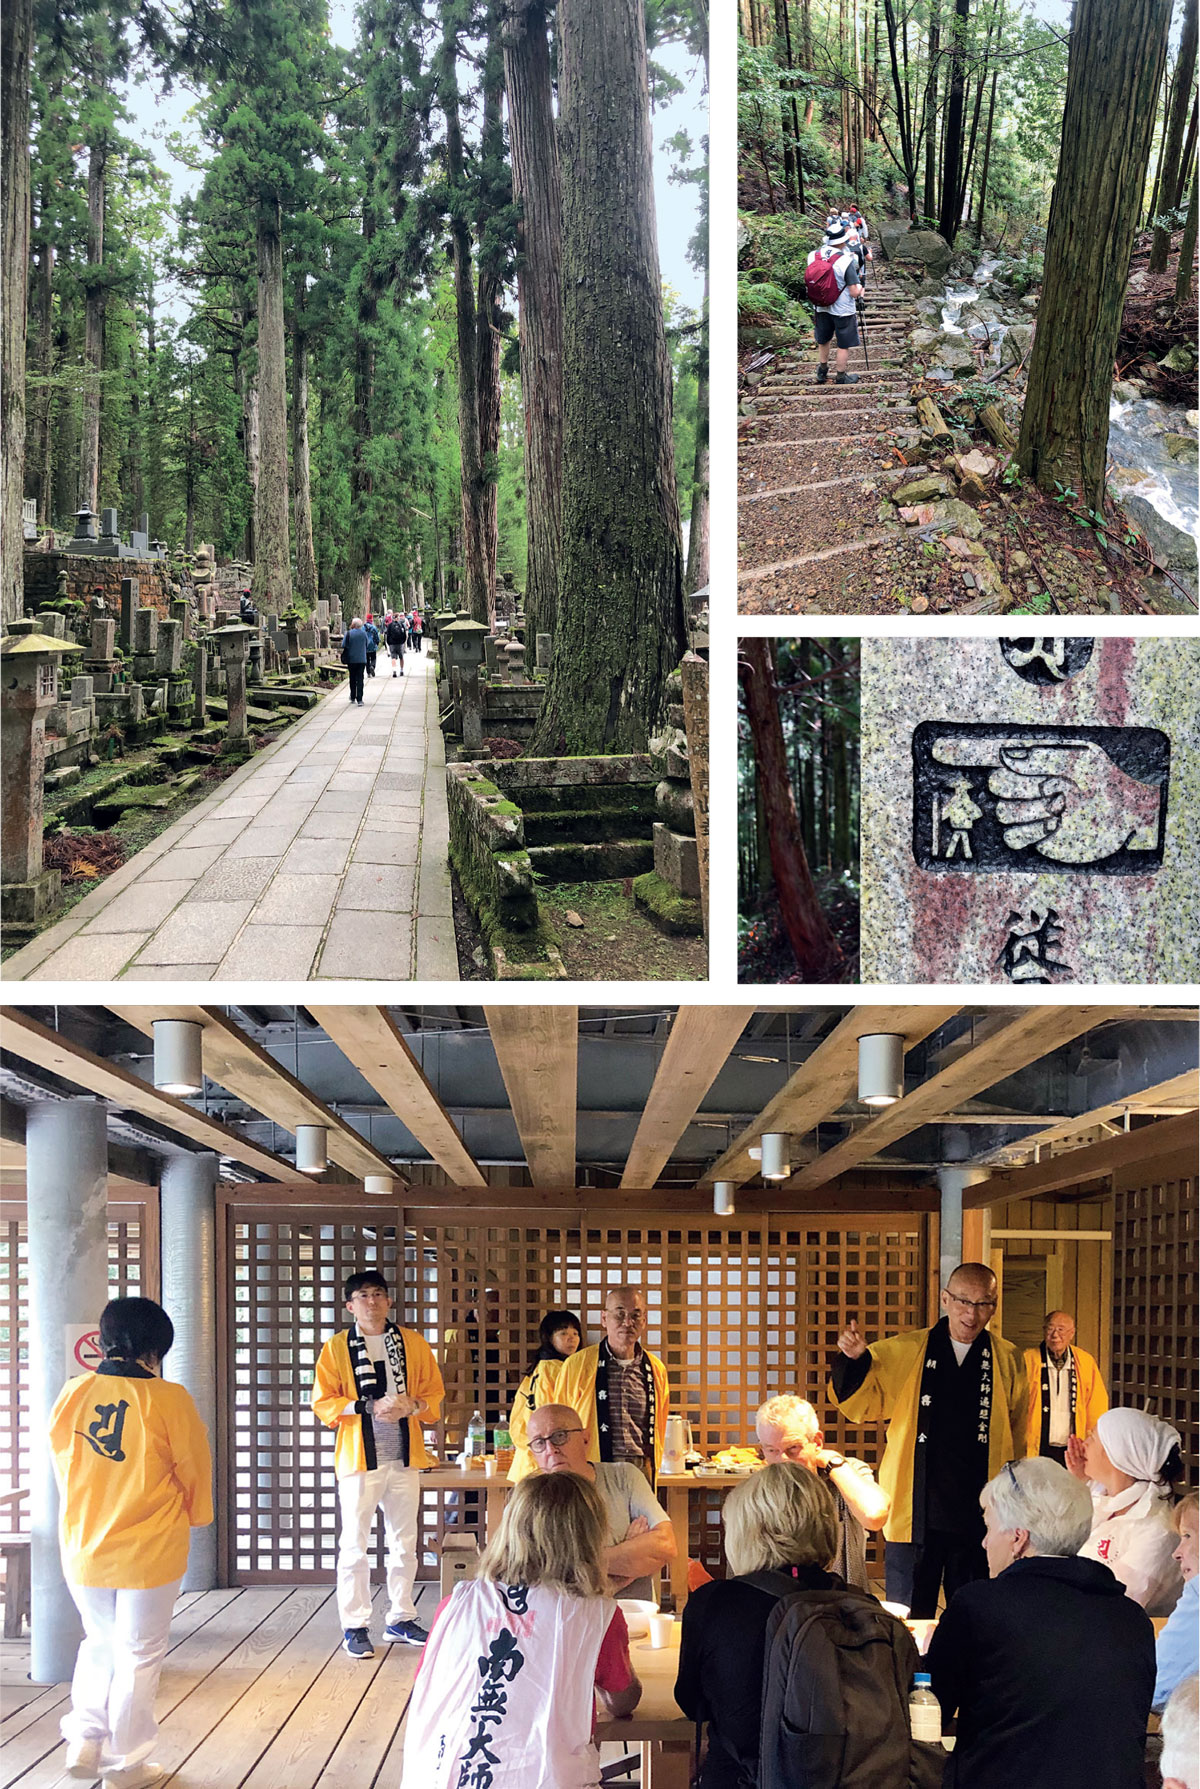 Walking-Search-Culture-Old-Japan-Okunoin-cemetery-sacred-Kyosan-ancient-cedar-trees-pilgrim-Shikoko-circuit-forests-temple